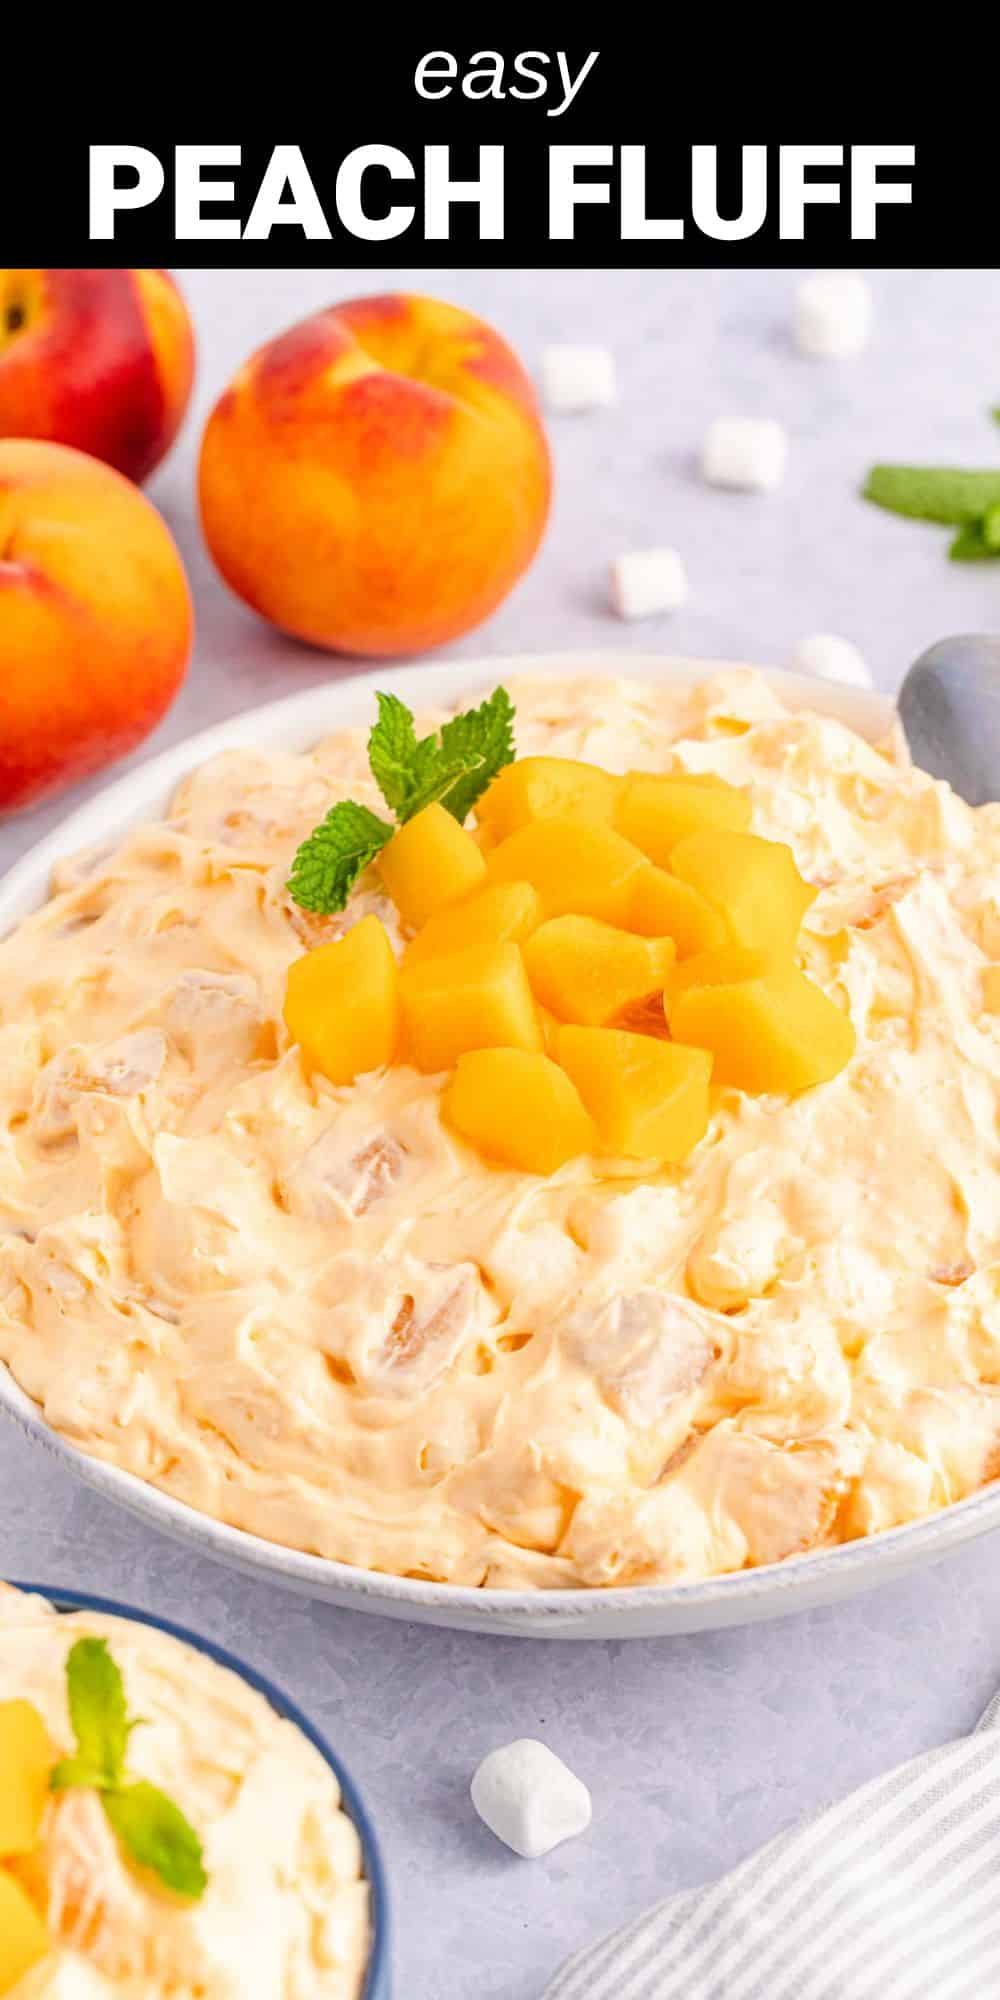 This light and fluffy Peach Fluff Salad is a timeless dessert or side dish that’s perfect for your next potluck, family gatherings, or a last-minute sweet treat. Loaded with juicy bits of peaches and studded with mini marshmallows, this simple and delicious recipe only takes 5 minutes to whip up.